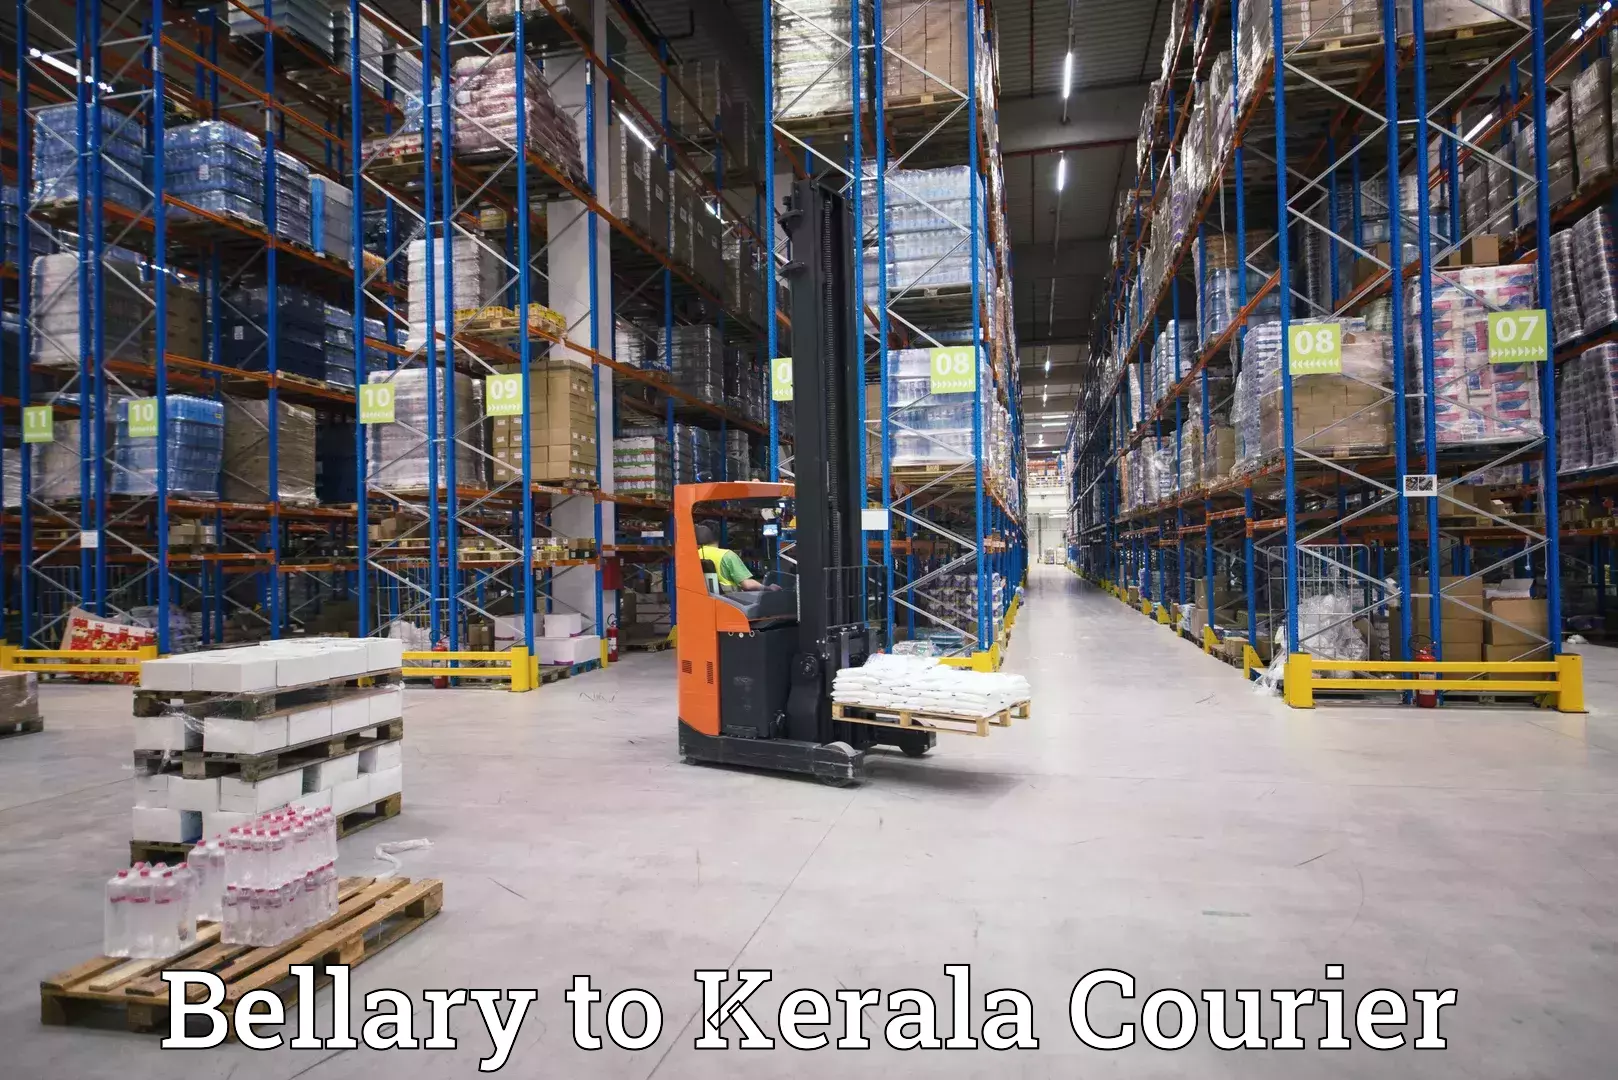 Courier service comparison Bellary to Palakkad